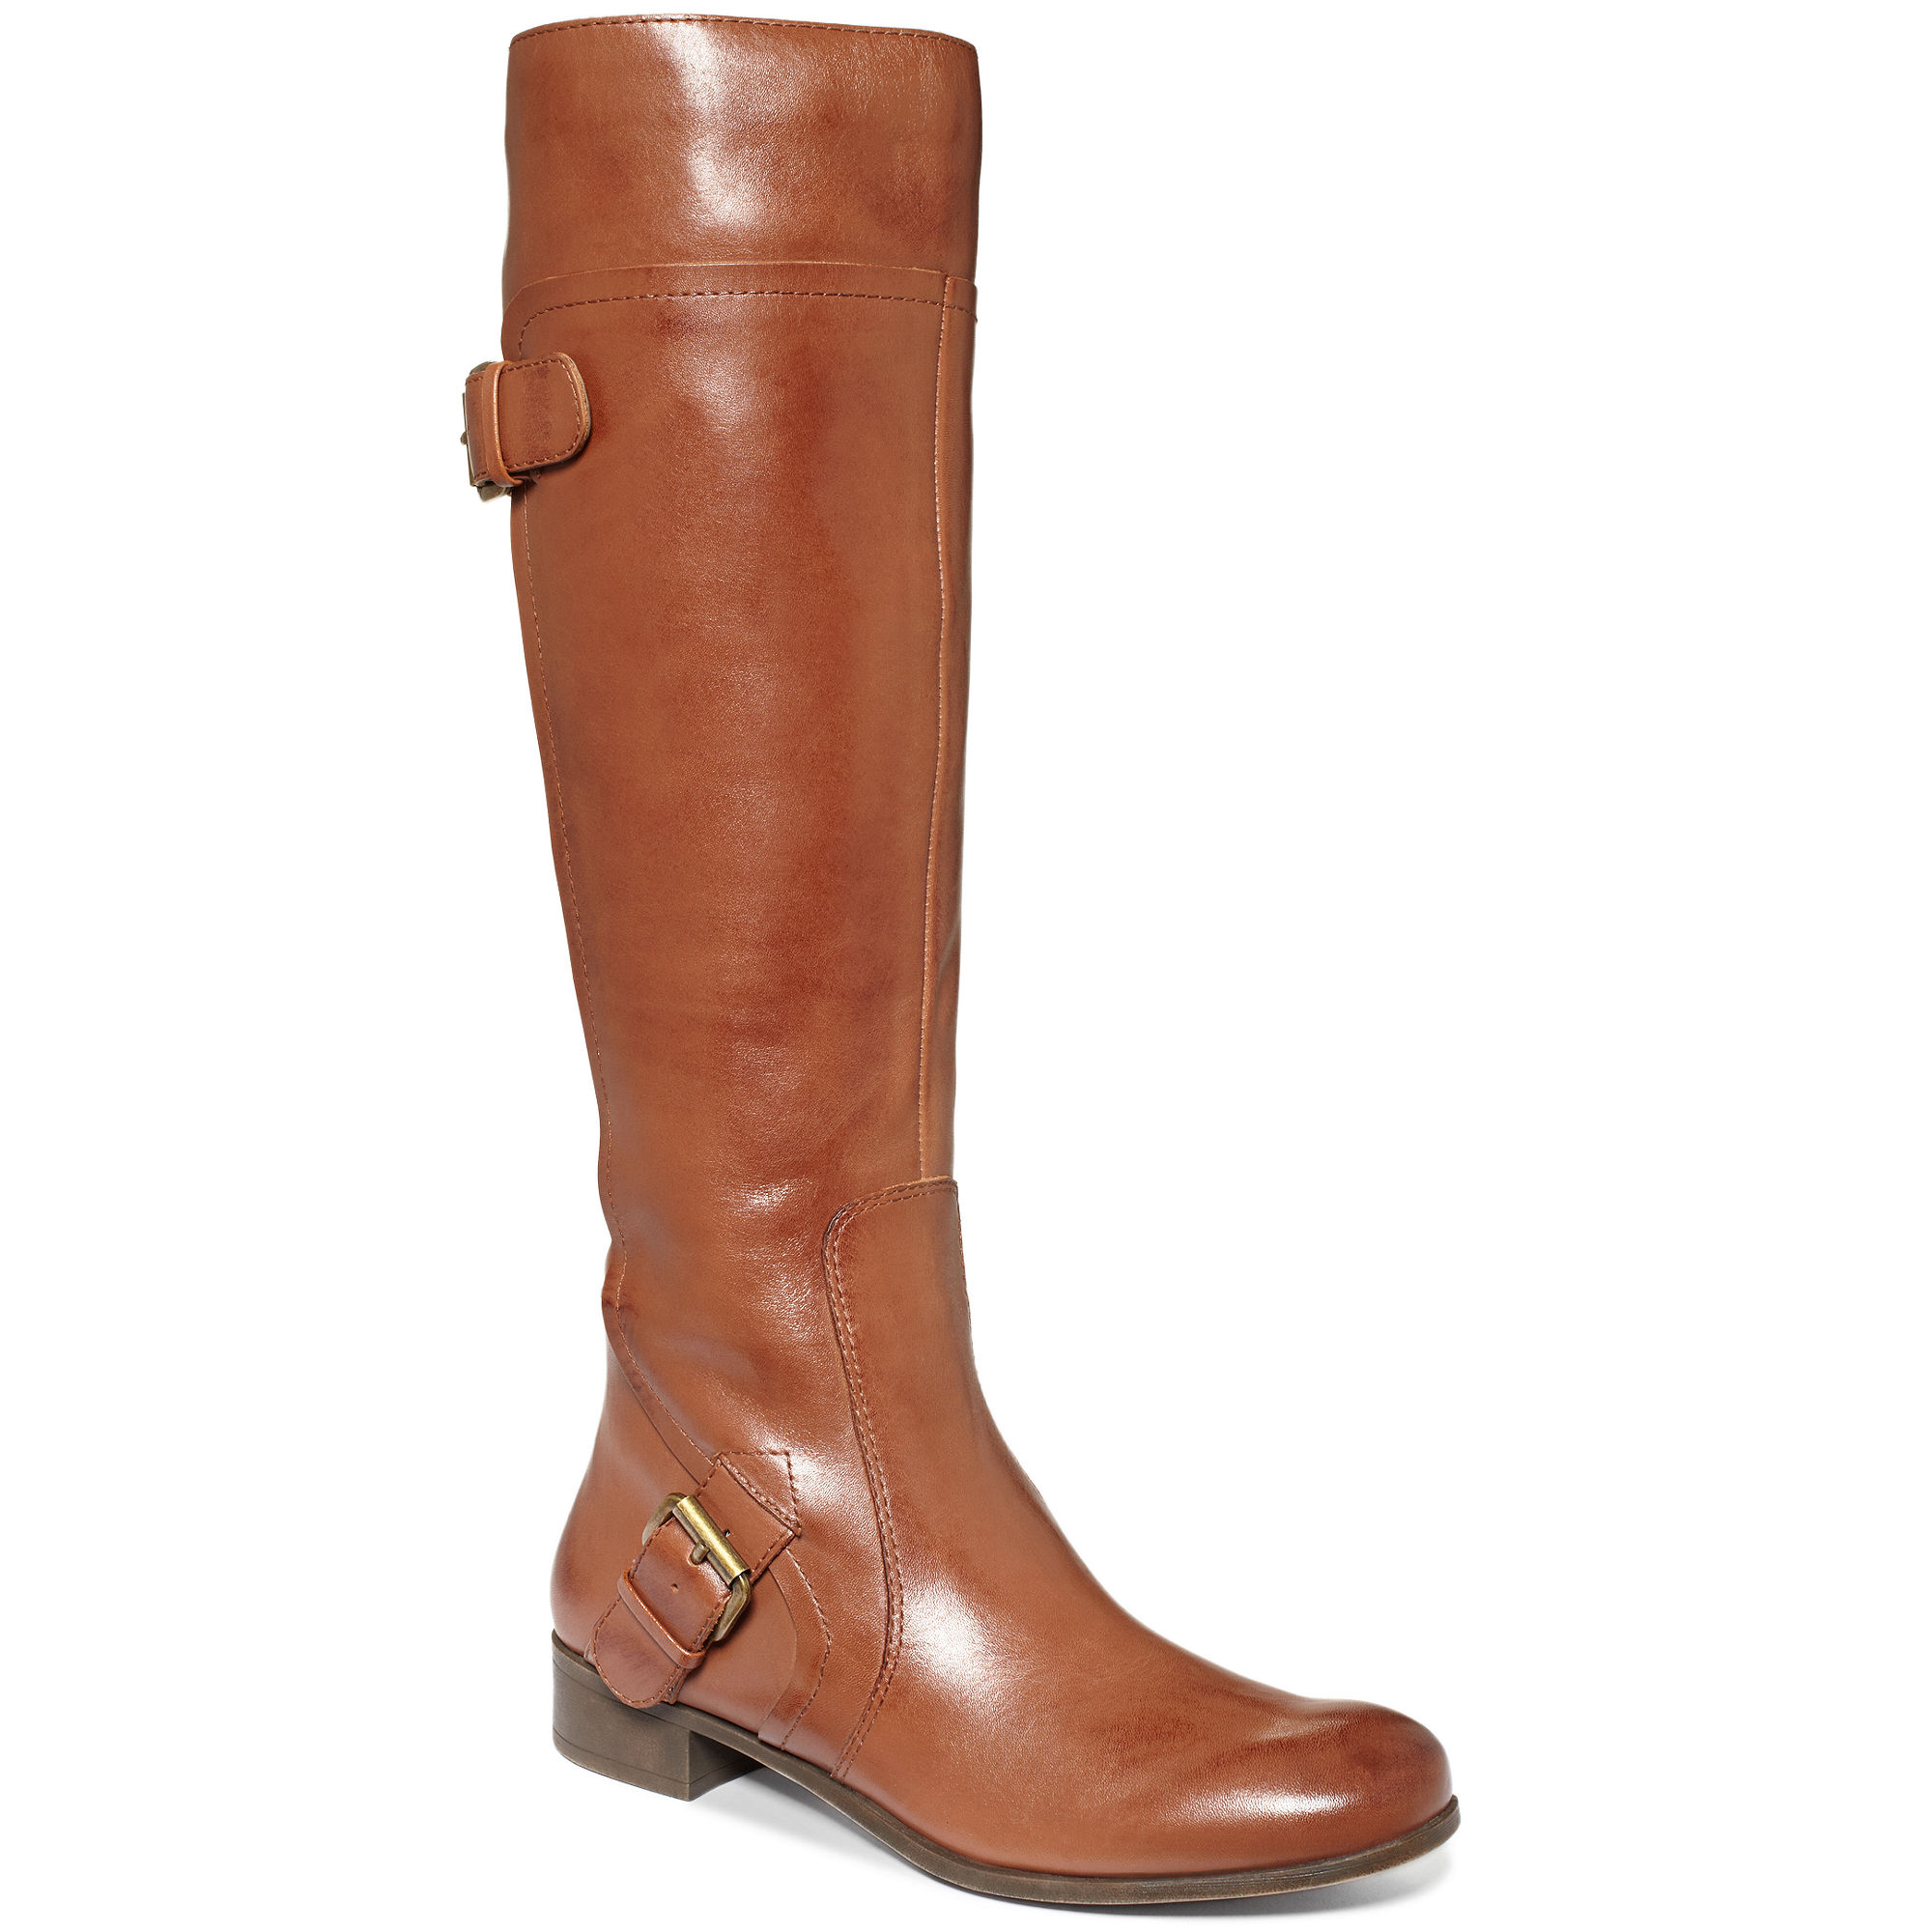 Lyst - Nine West Sookie Wide Calf Riding Boots in Brown